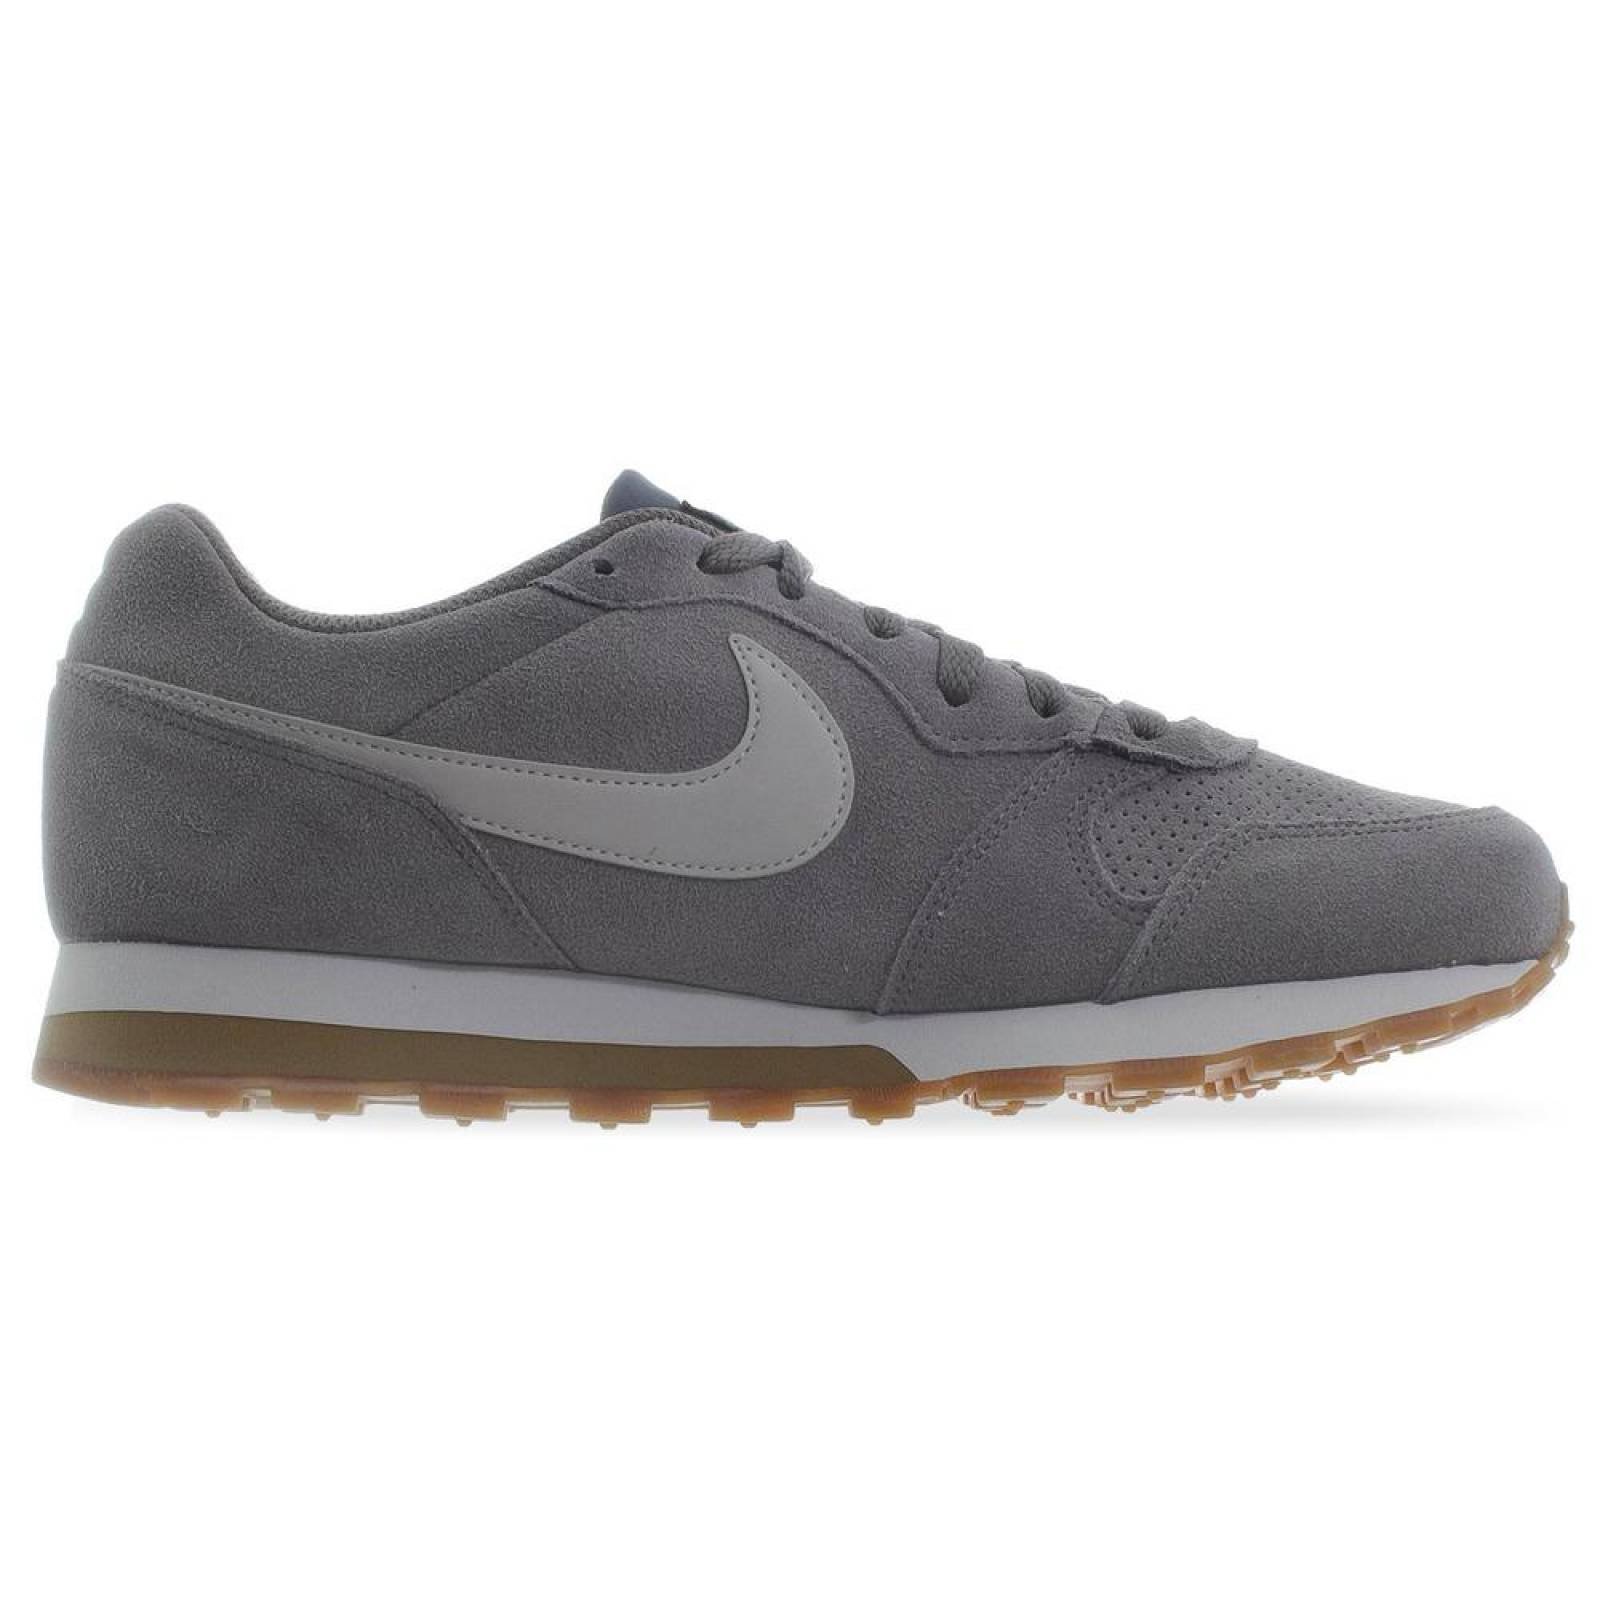 Tenis Nike MD Runner 2 Suede - AQ9211002 - Gris - Hombre 